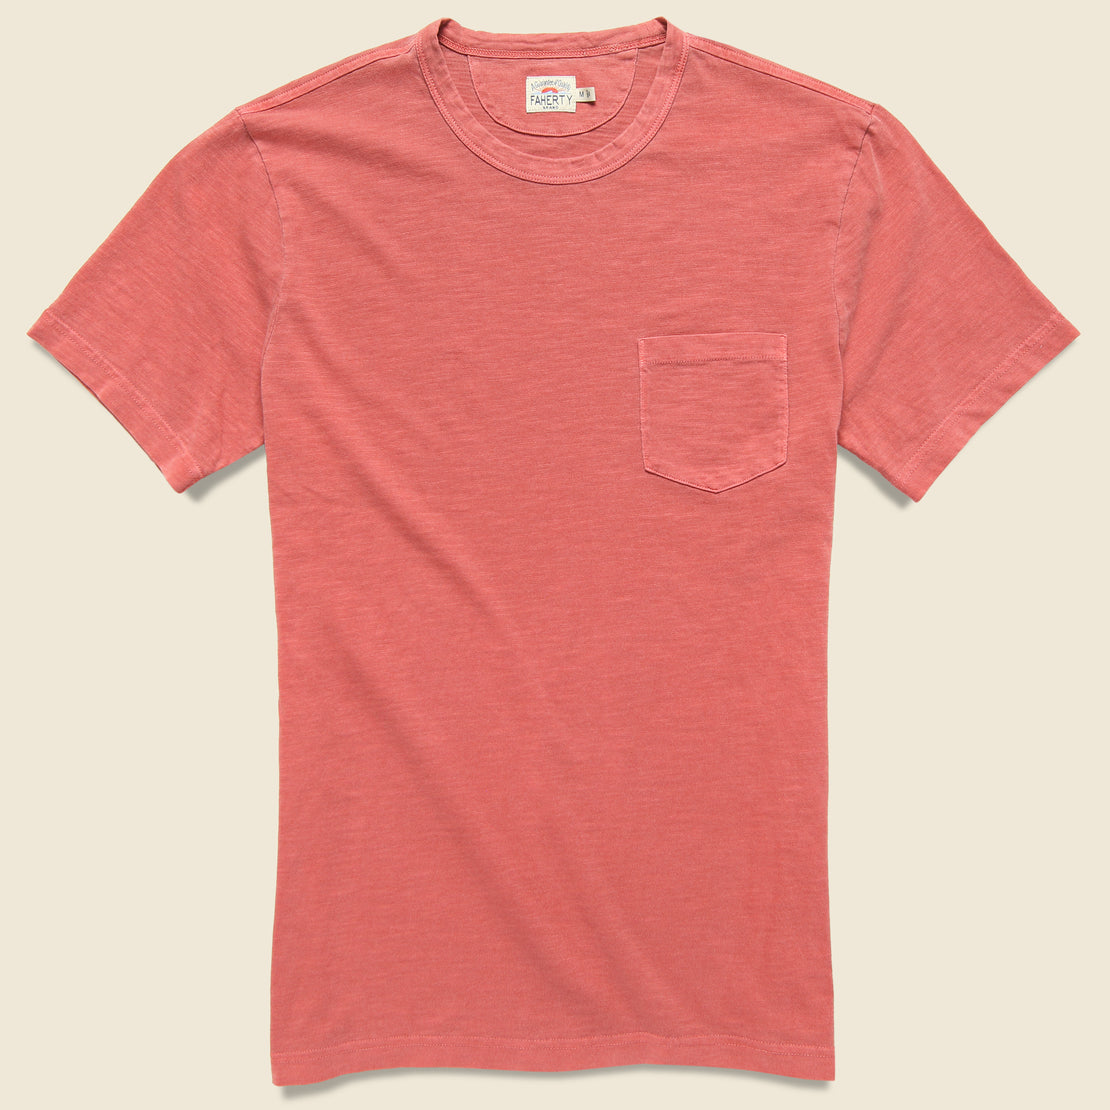 Faherty Garment Dye Pocket Tee - Faded Red